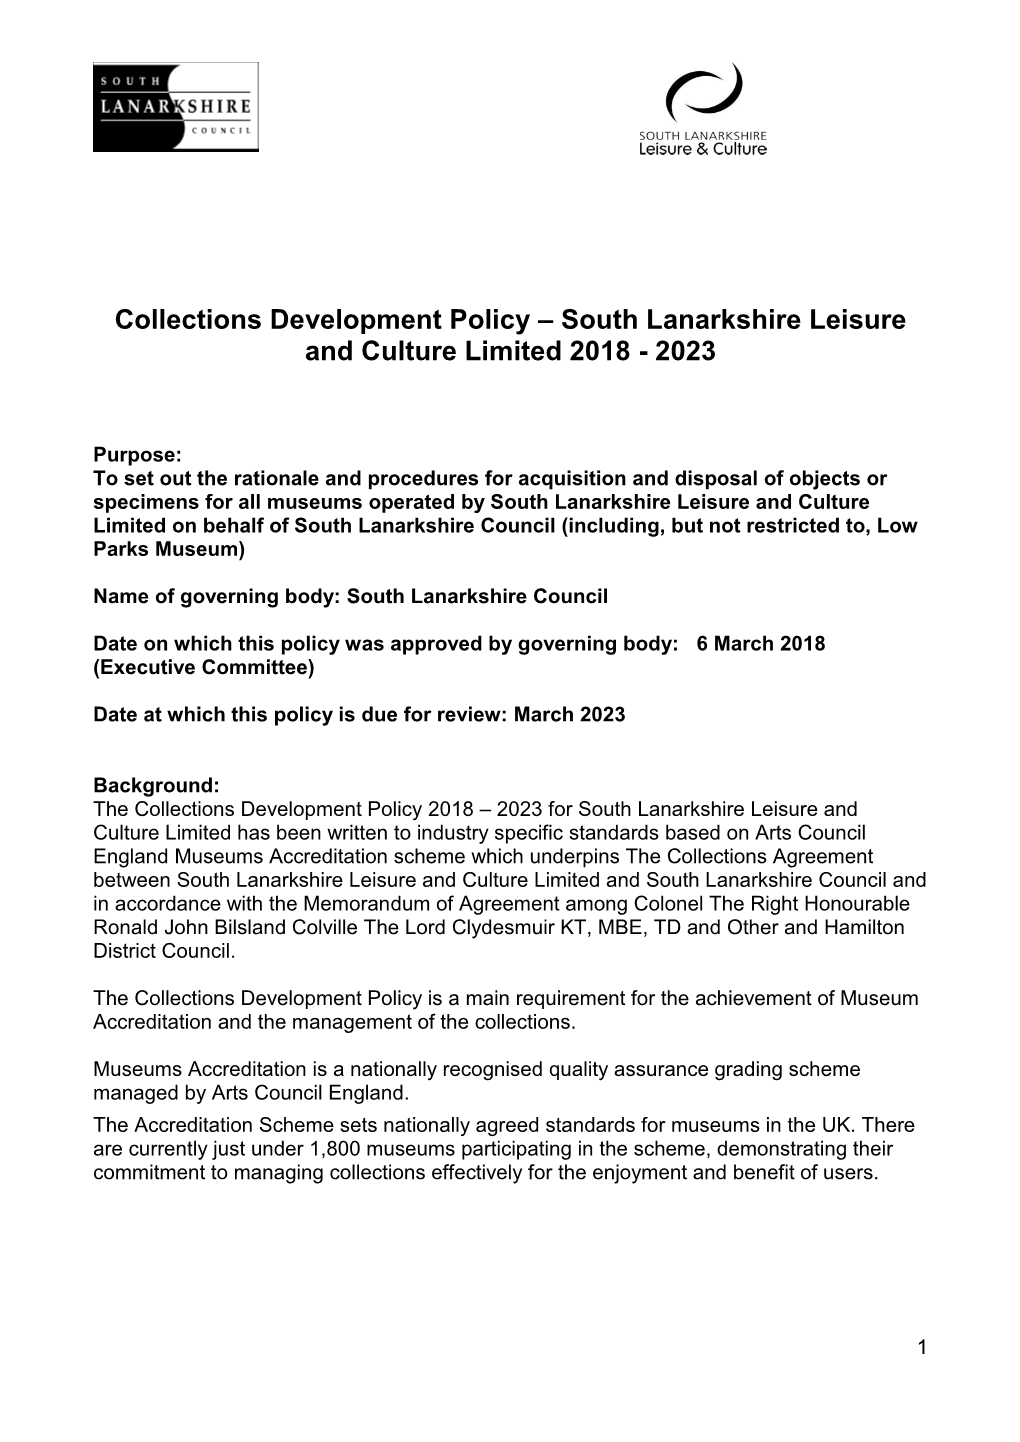 Collections Development Policy – South Lanarkshire Leisure and Culture Limited 2018 - 2023